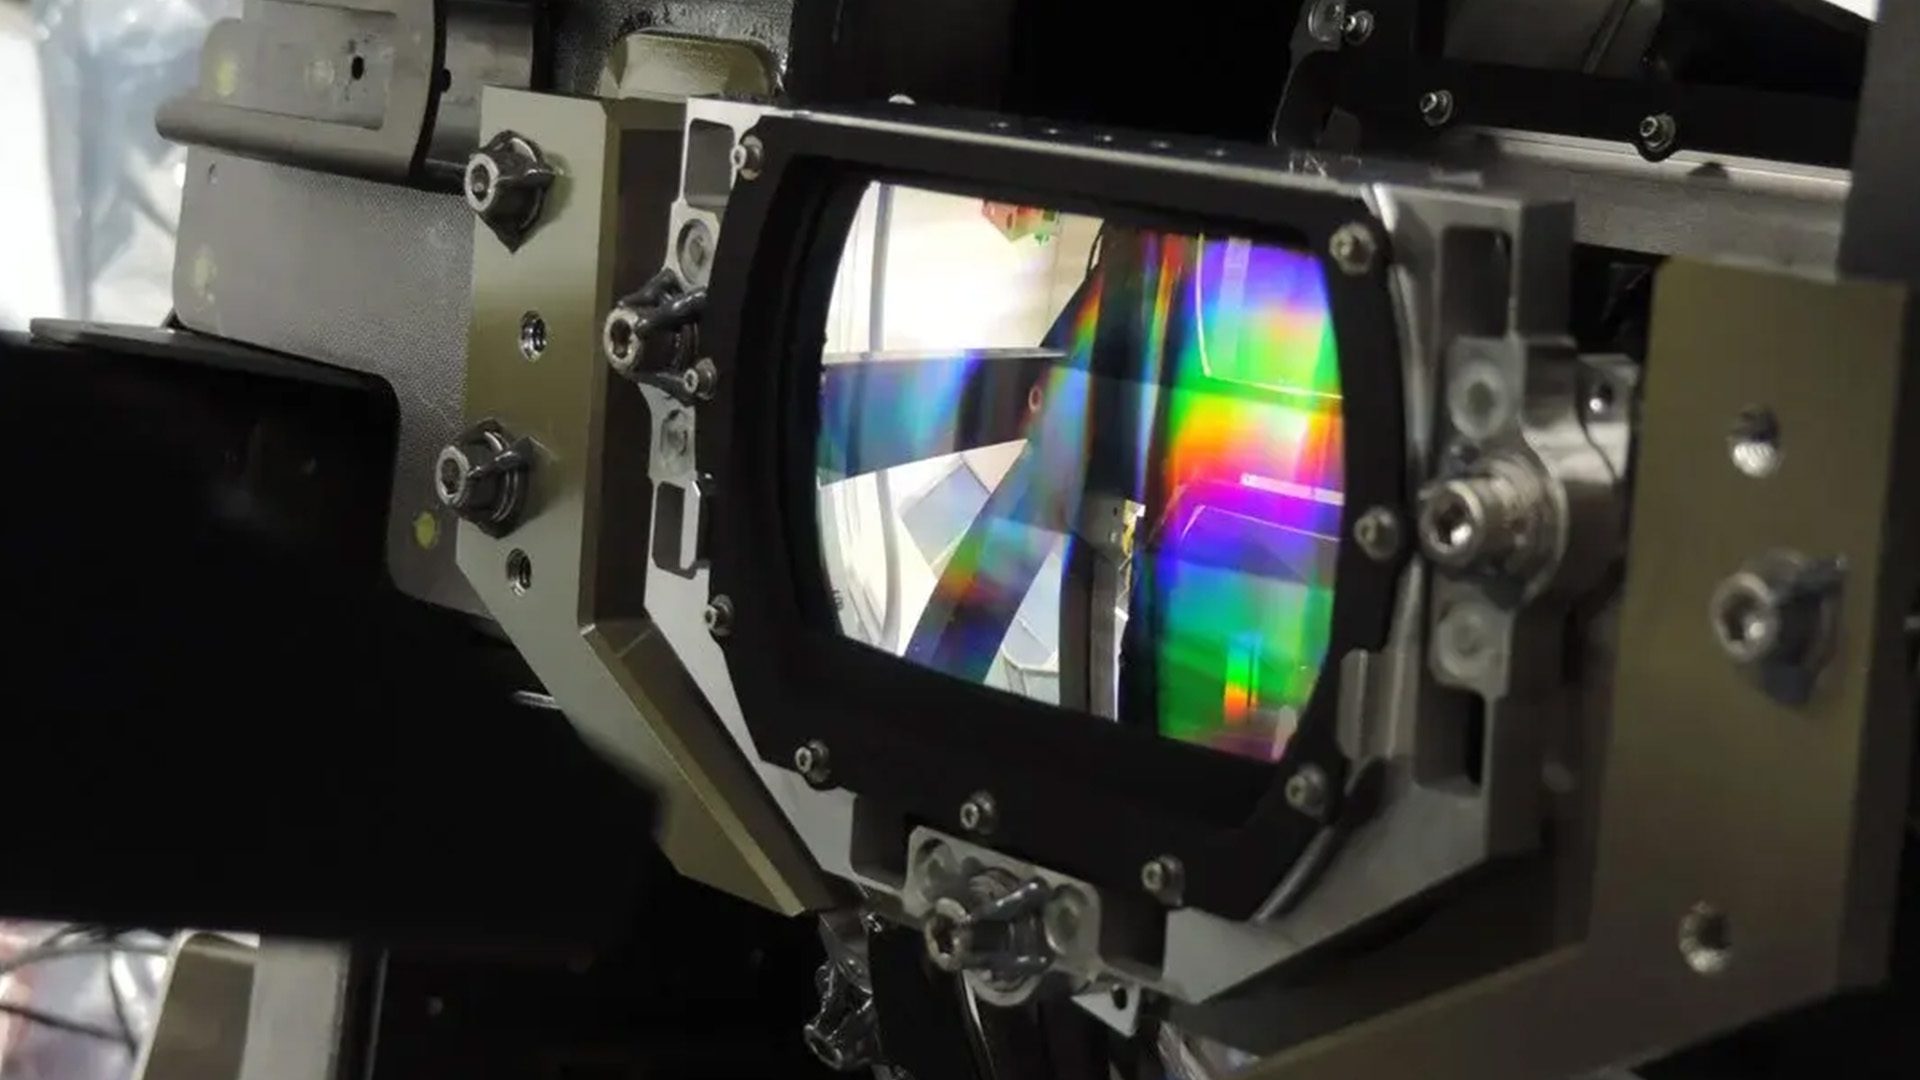 TEMPO employs a spectrometer sensitive to both visible and ultraviolet wavelengths